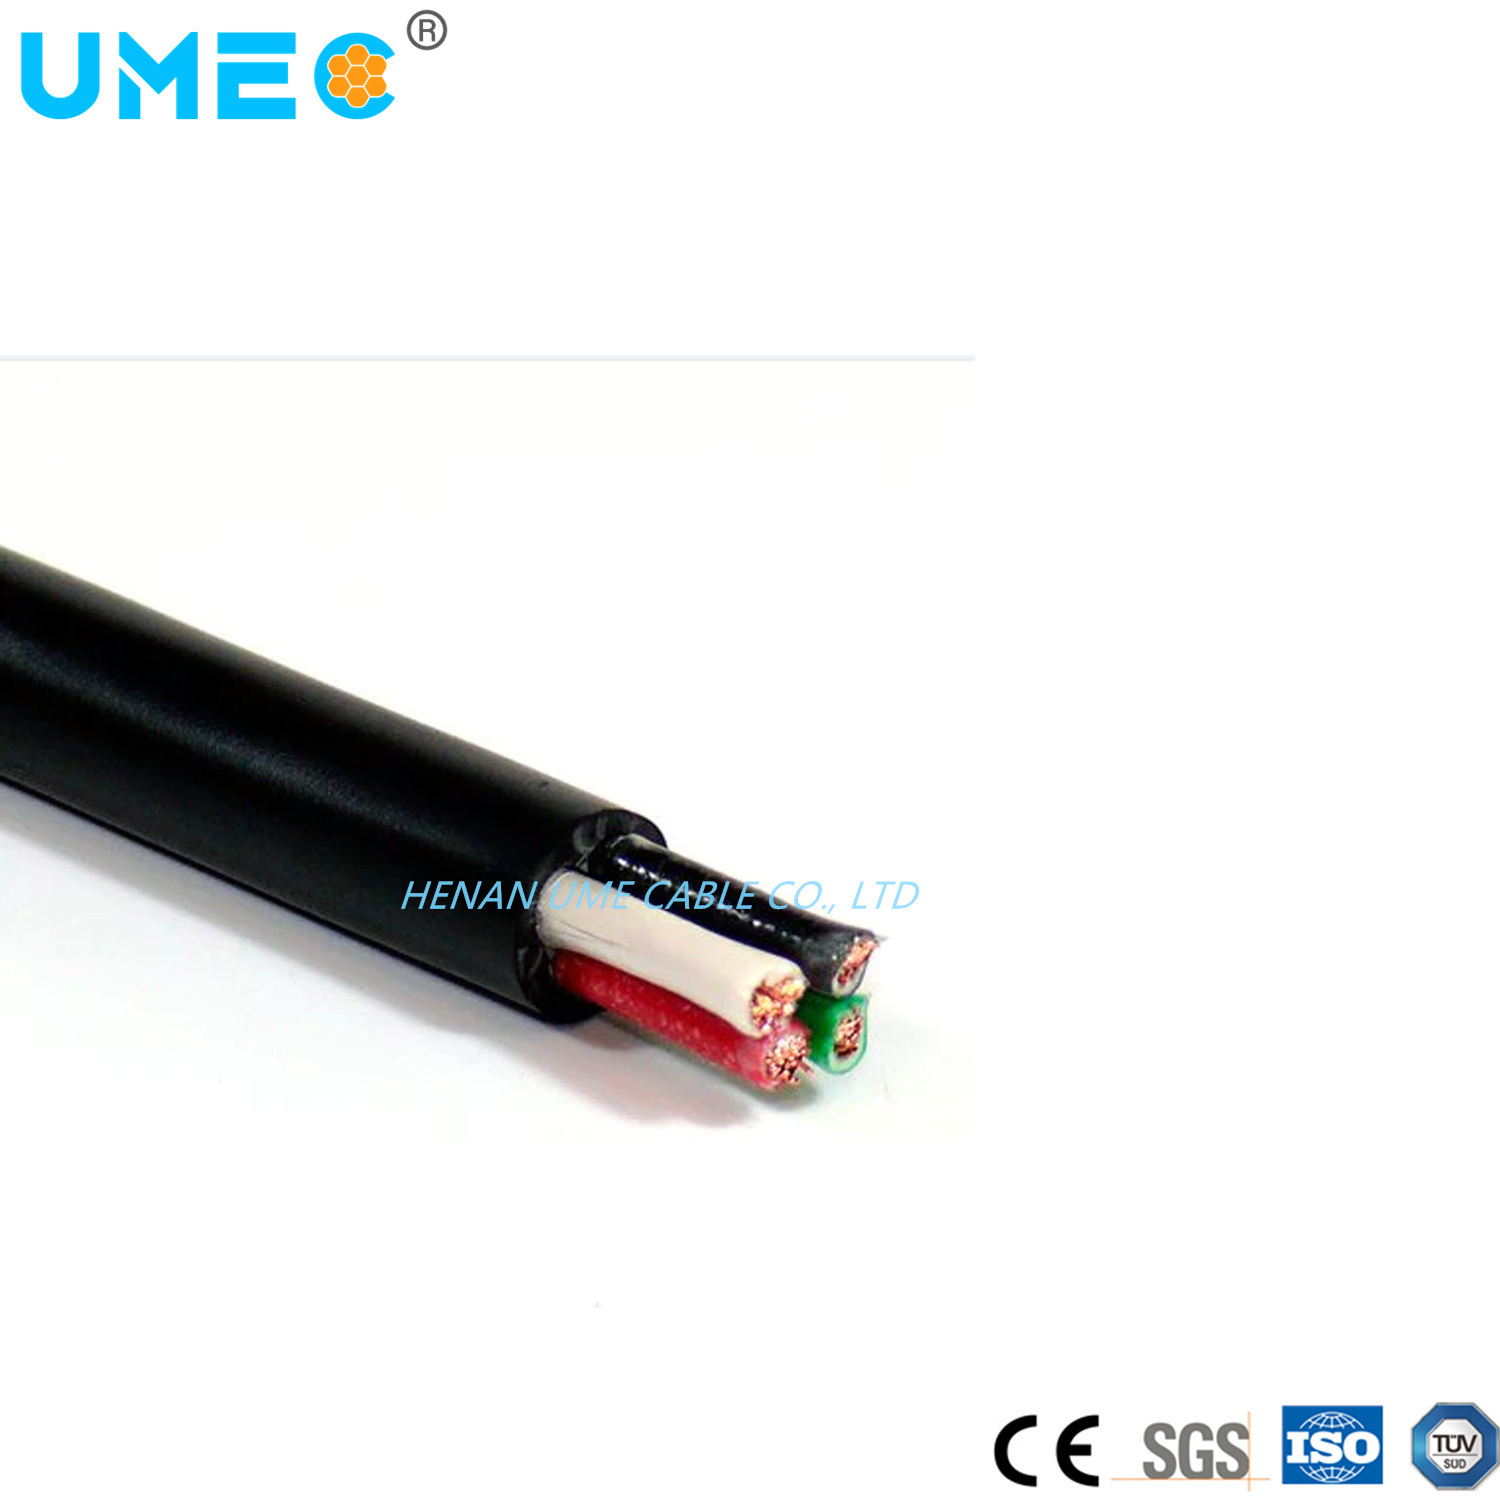 Tsj IEC Approved PVC Insulated Nylon Sheathed 2X8AWG 3X12AWG Electrical Wire and Cables Tsj/Tjs-N Wire